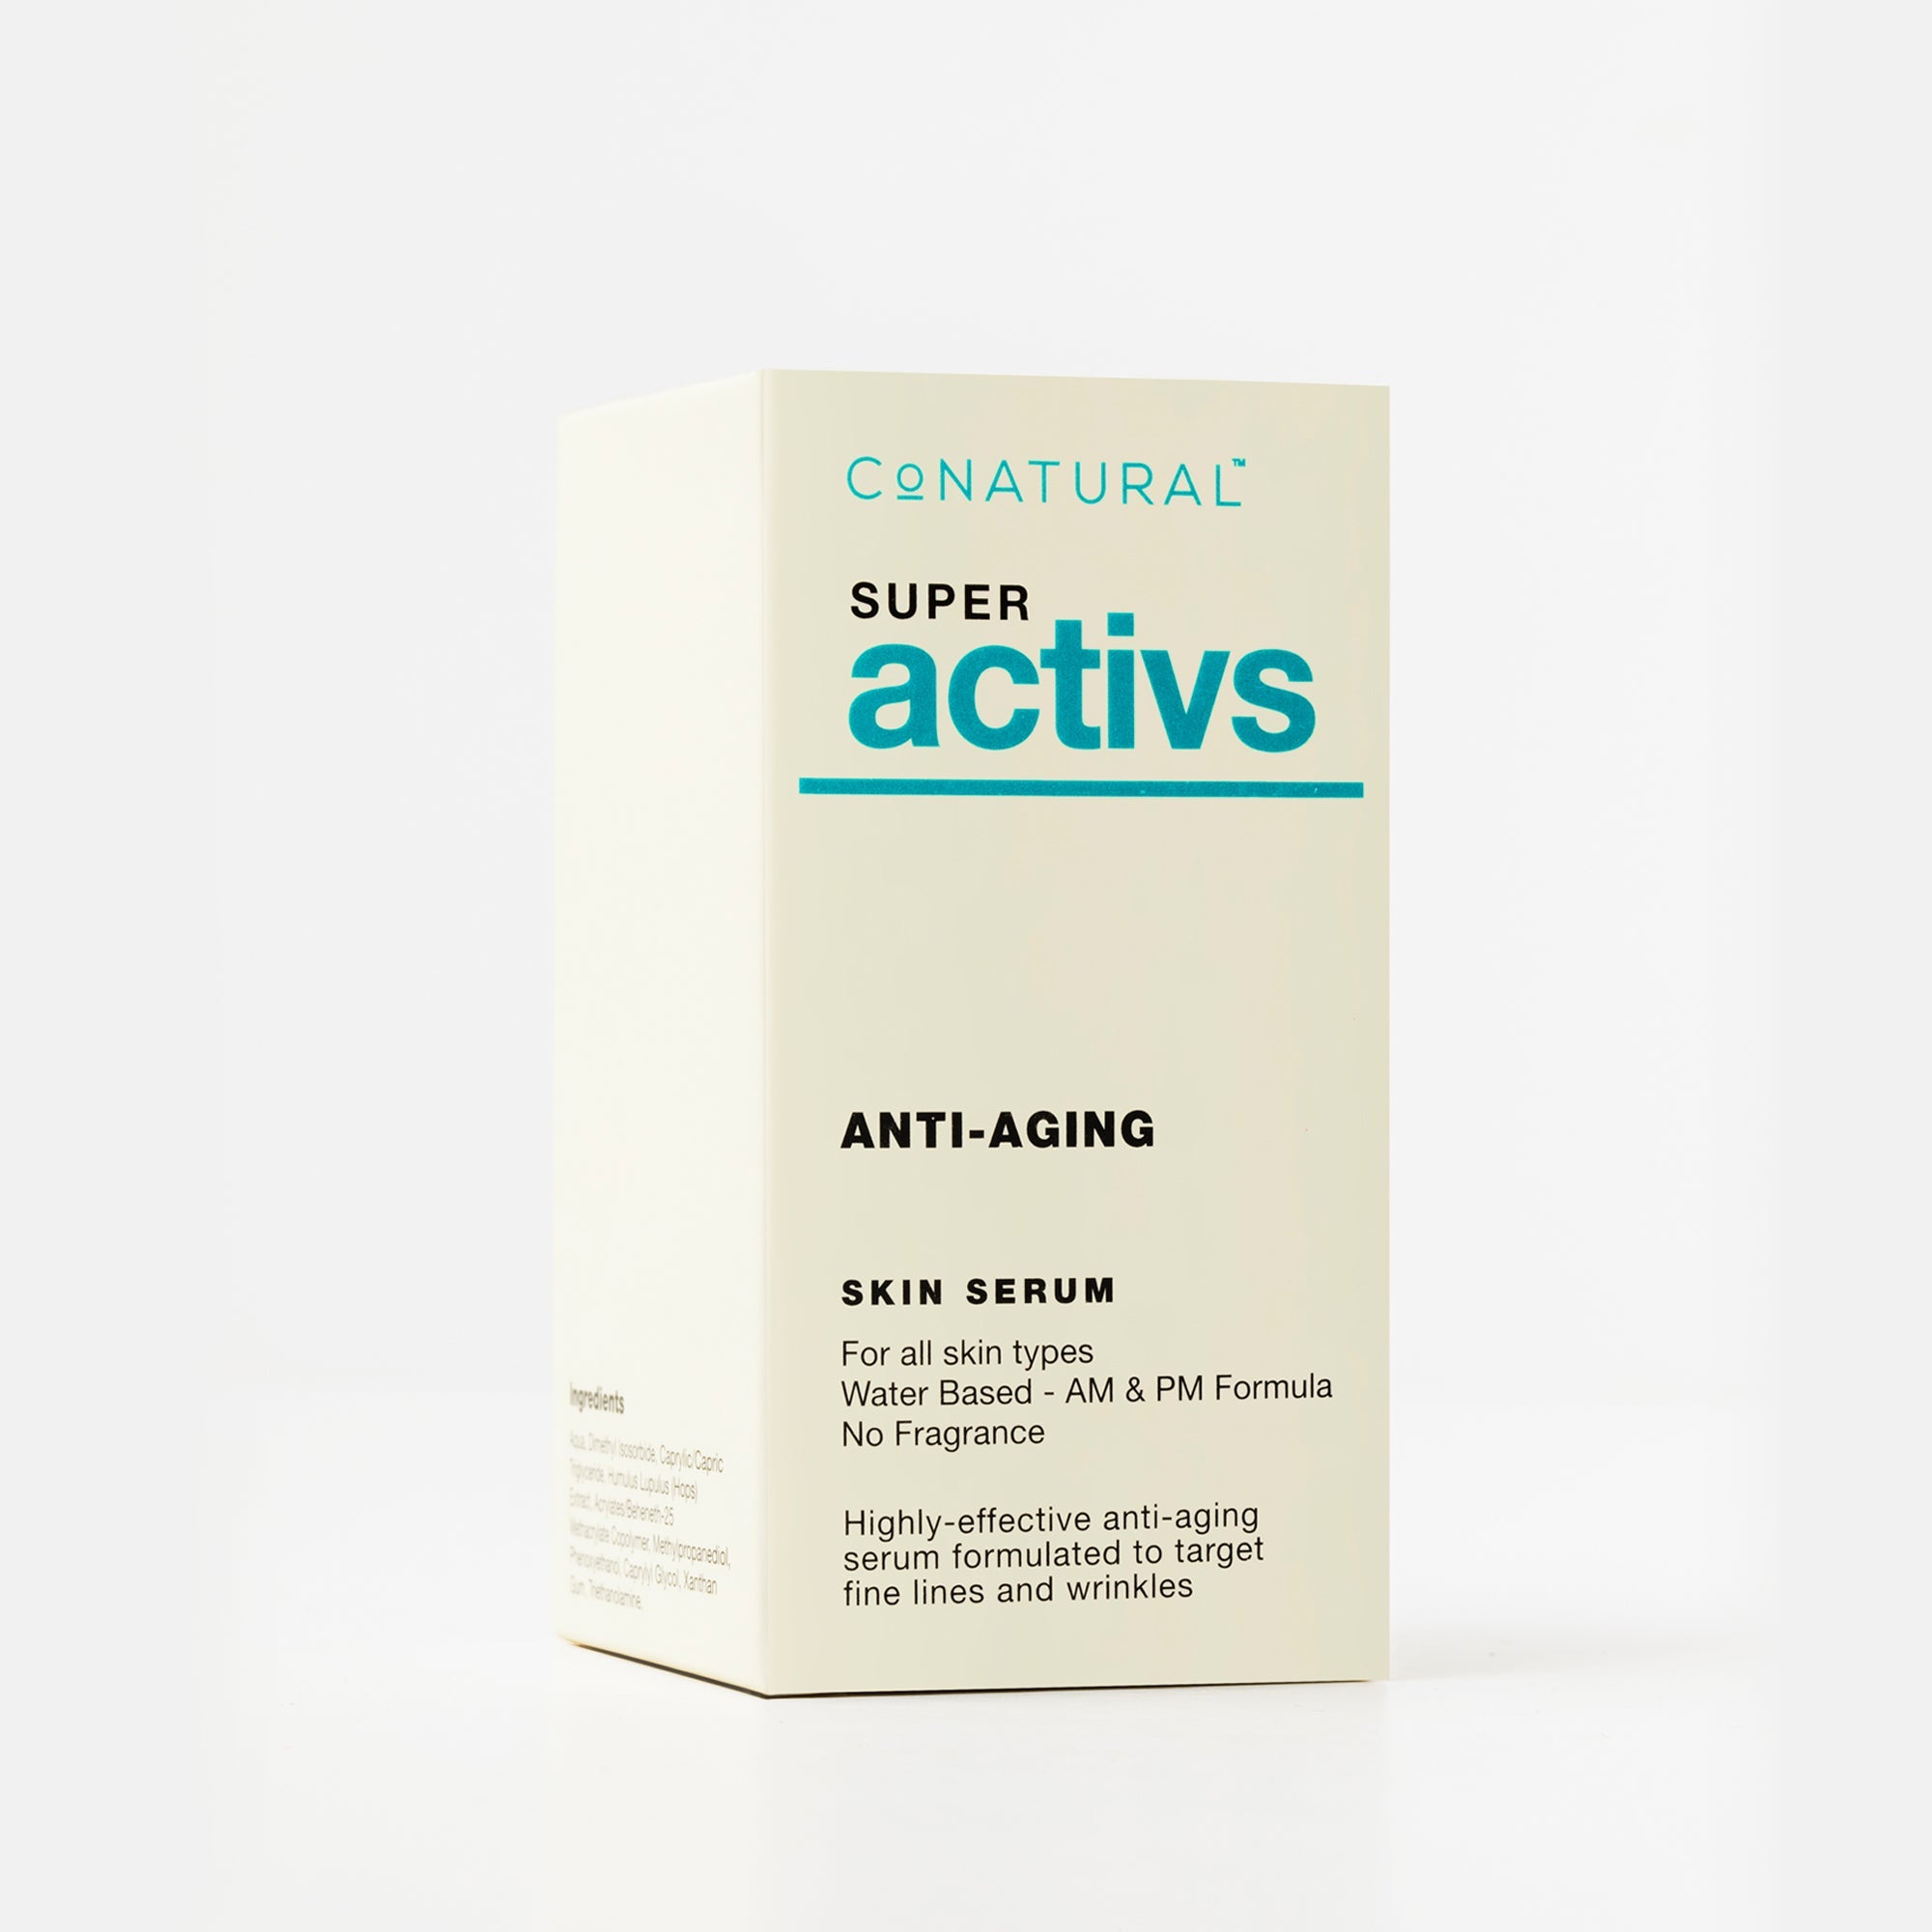 Buy Anti-Aging Skin Serum from CoNatural at the Best Prices online in Pakistan, Quick Delivery and Easy Returns only at The Nature's Store, Best organic and natural Face Serum in Pakistan, Best-Anti-Aging-Serum